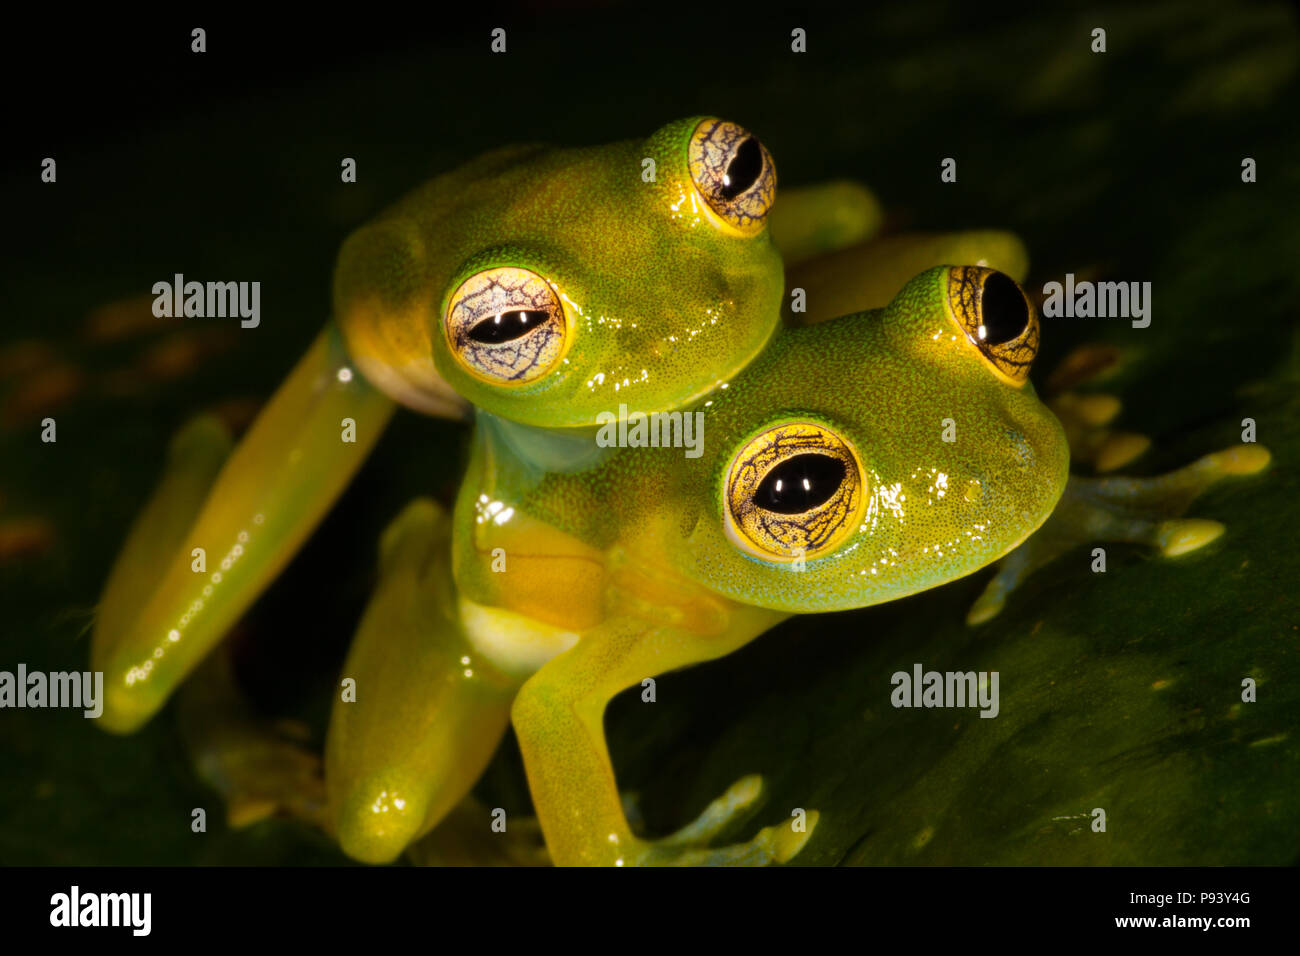 Panama wildlife with mating spiny cochran frogs, Teratohyla spinosa, at nighttime in the rainforest at Burbayar nature reserve, Republic of Panama. Stock Photo